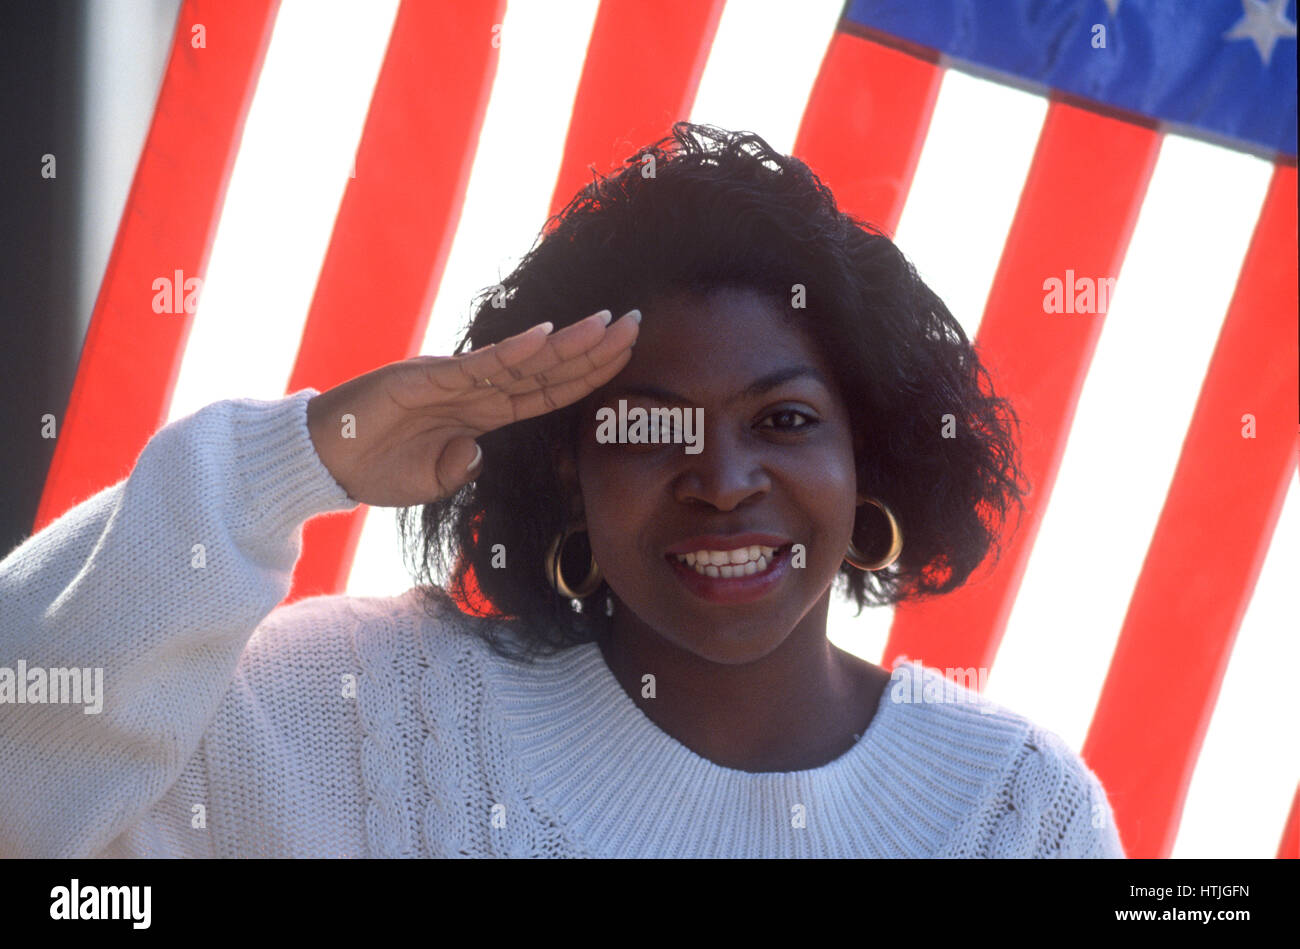 Woman salutes with flag as background Stock Photo